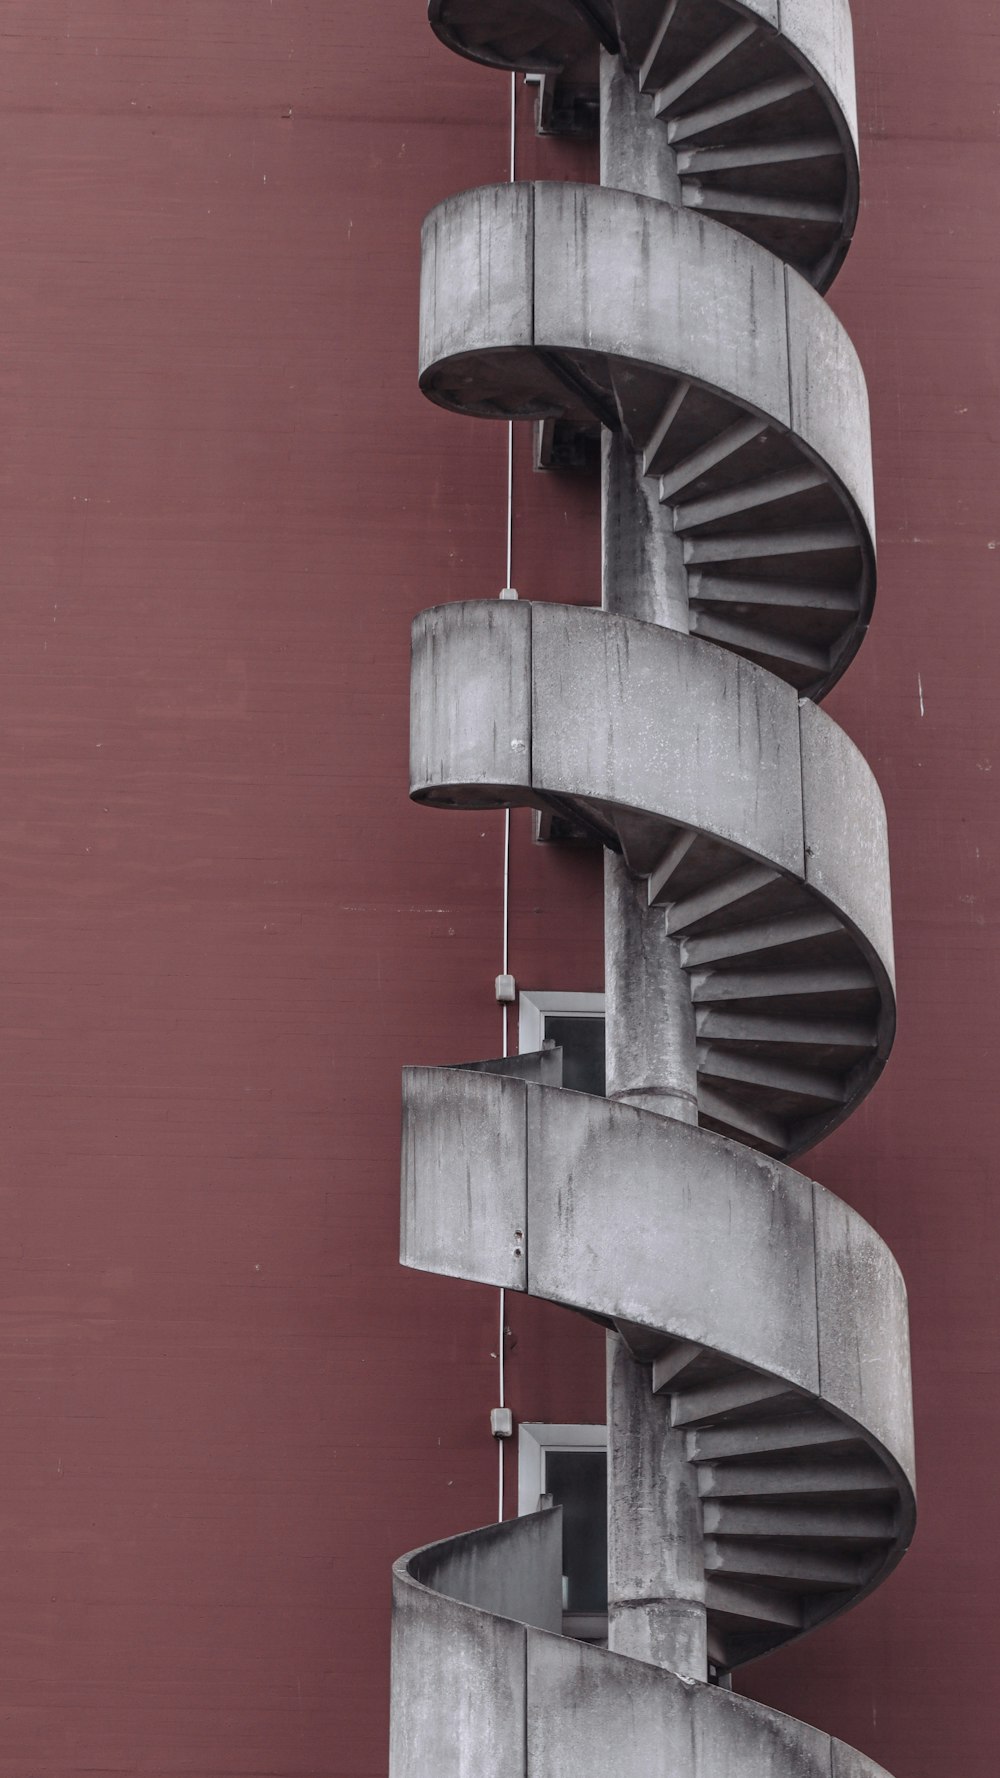 black spiral staircase on red wall